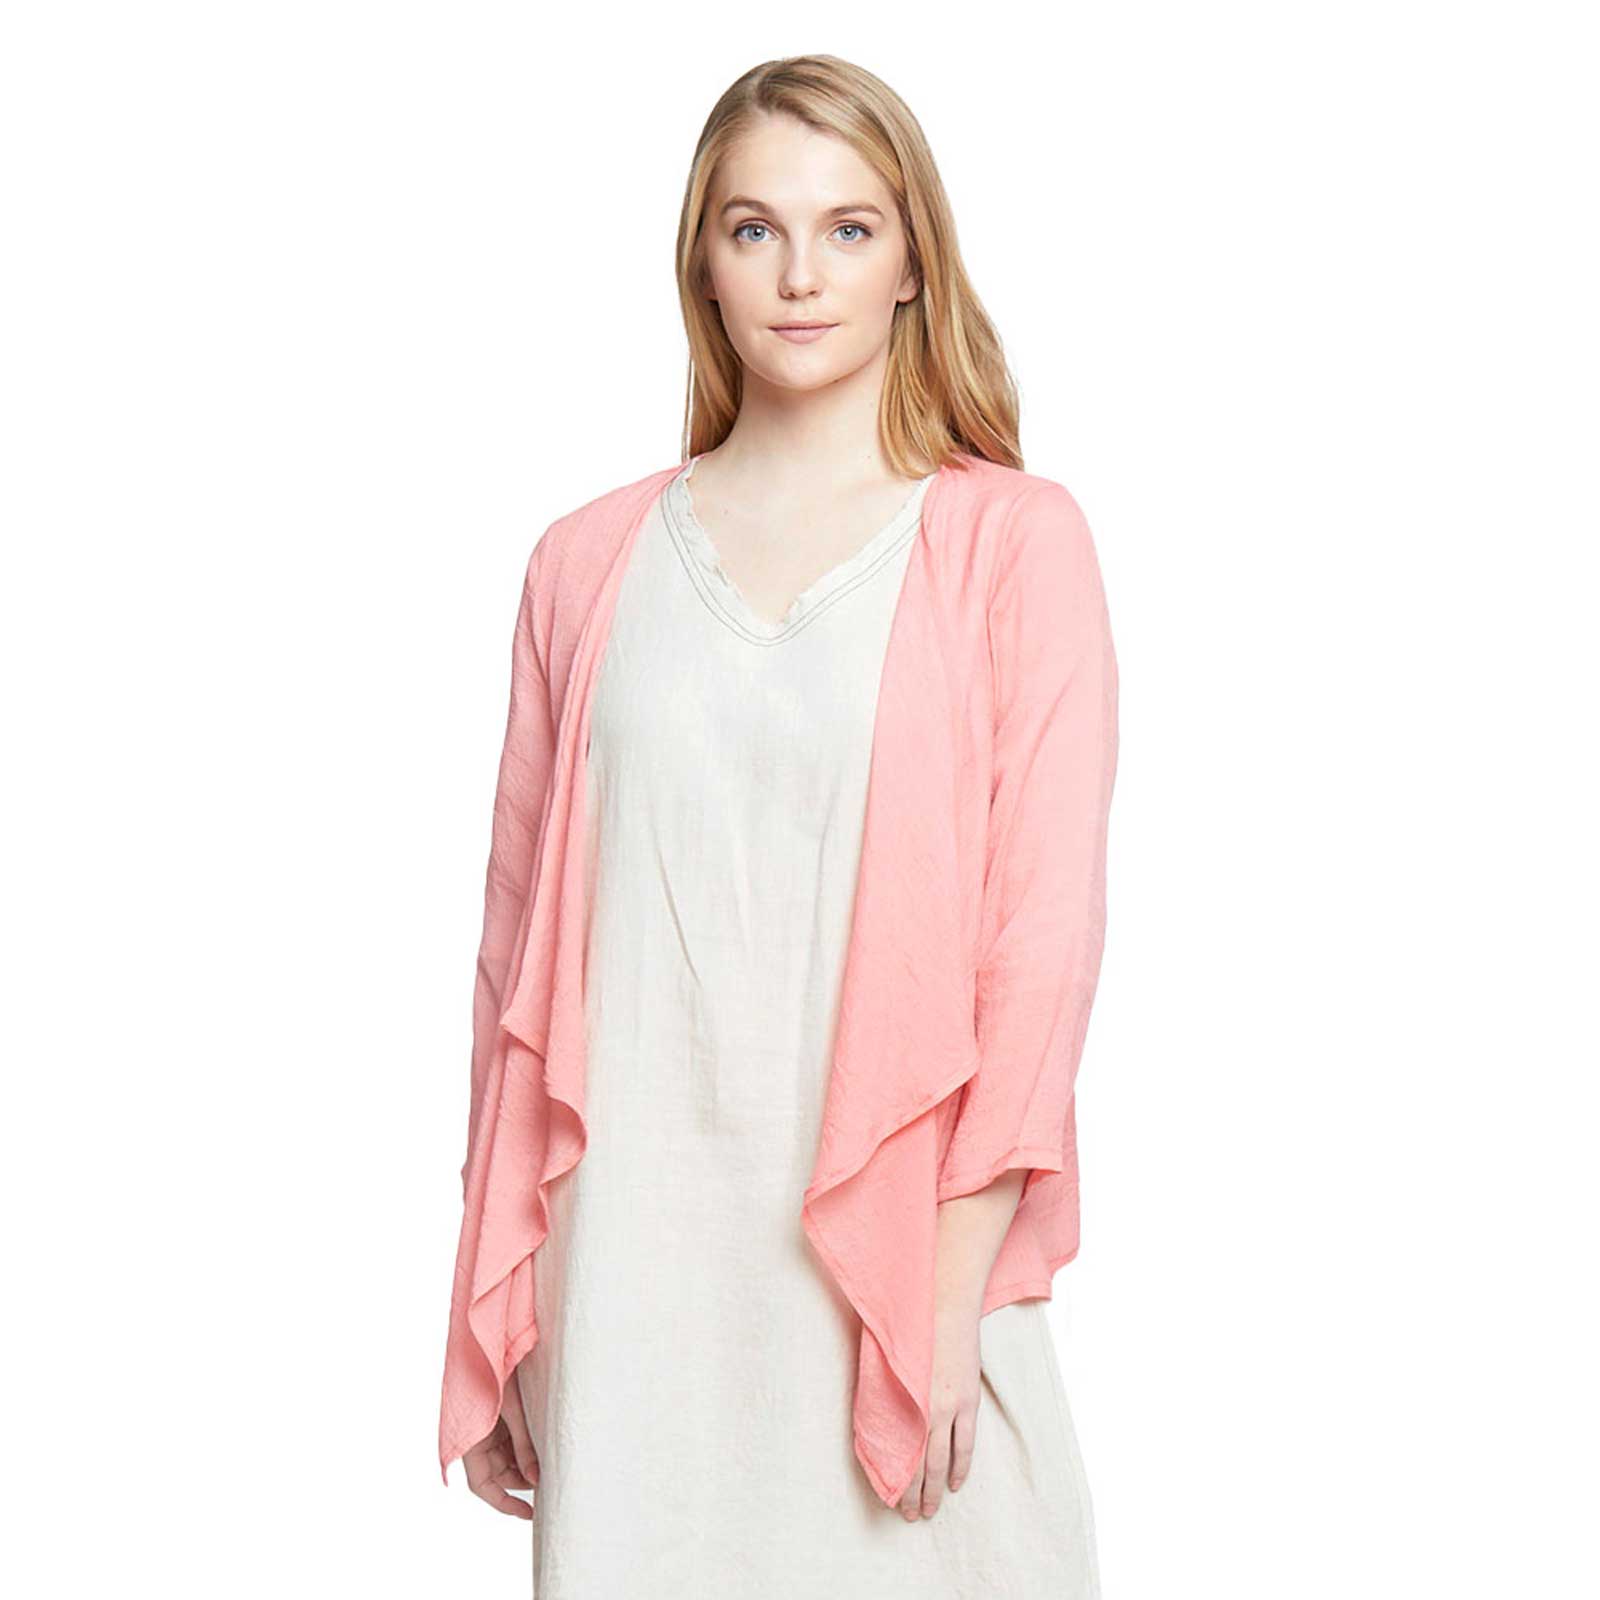 Peach Front Tie Short Cardigan,  This Summer Cardigans are Made of high-quality material which is very soft and breathable for Women.  The added short edge gives better coverage with a feminine look. Front Tie Short Kimono suitable to wear with Jeans, Shorts, T-shirt, Midi Skirt and Dresses! Perfect for Vacation, Office, Home, Evening Party Spring, Summer and Fall.